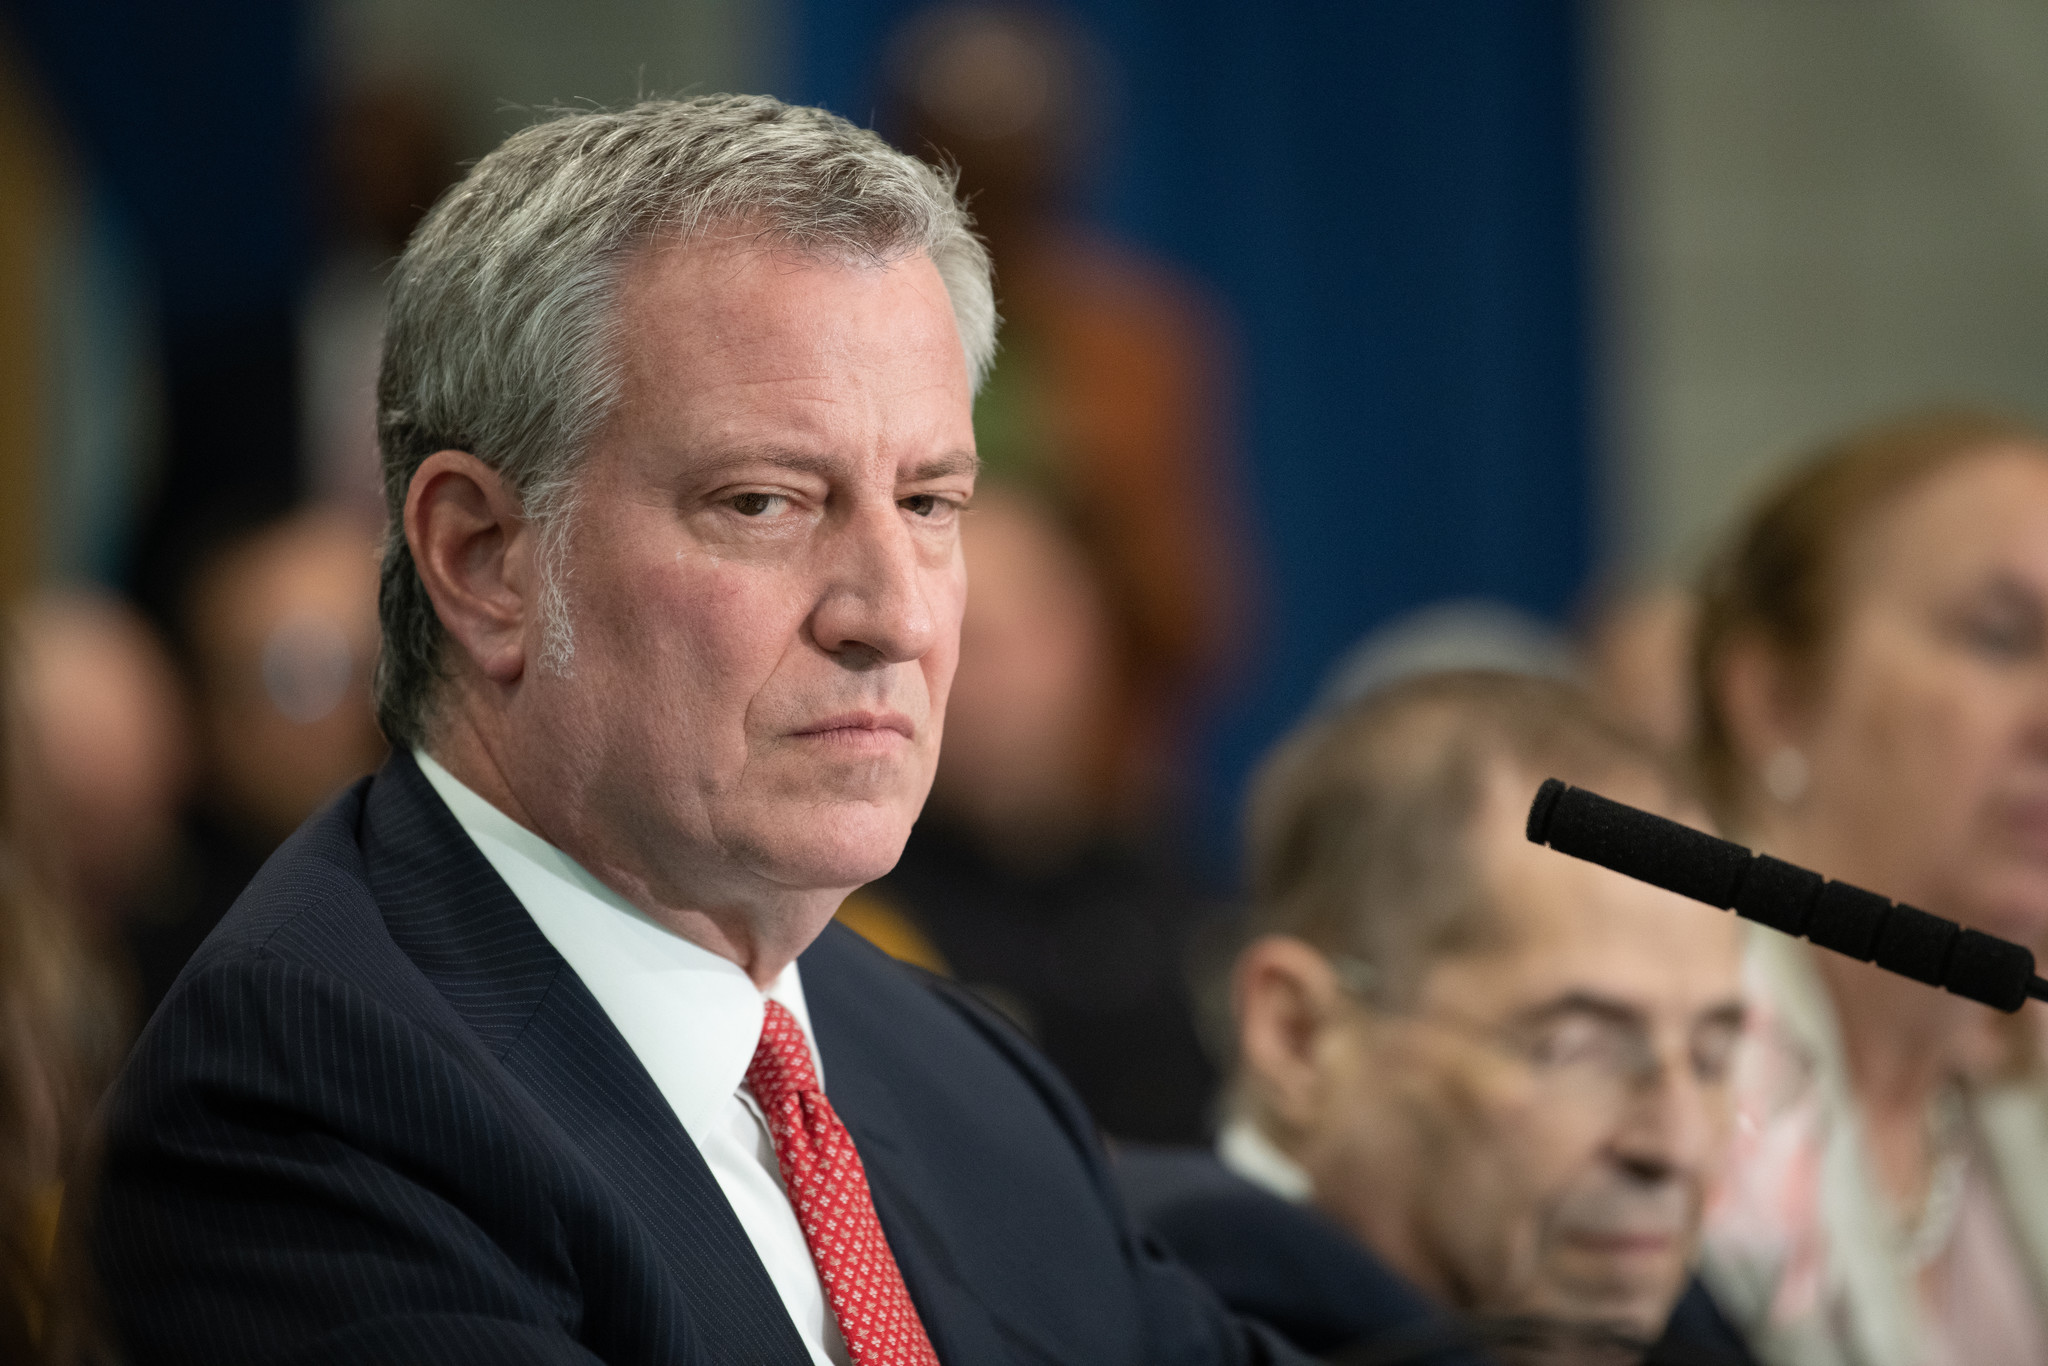 Mayor de Blasio rejects $1.3M in federal health funds tied to Trump administration’s abortion ‘gag rule’